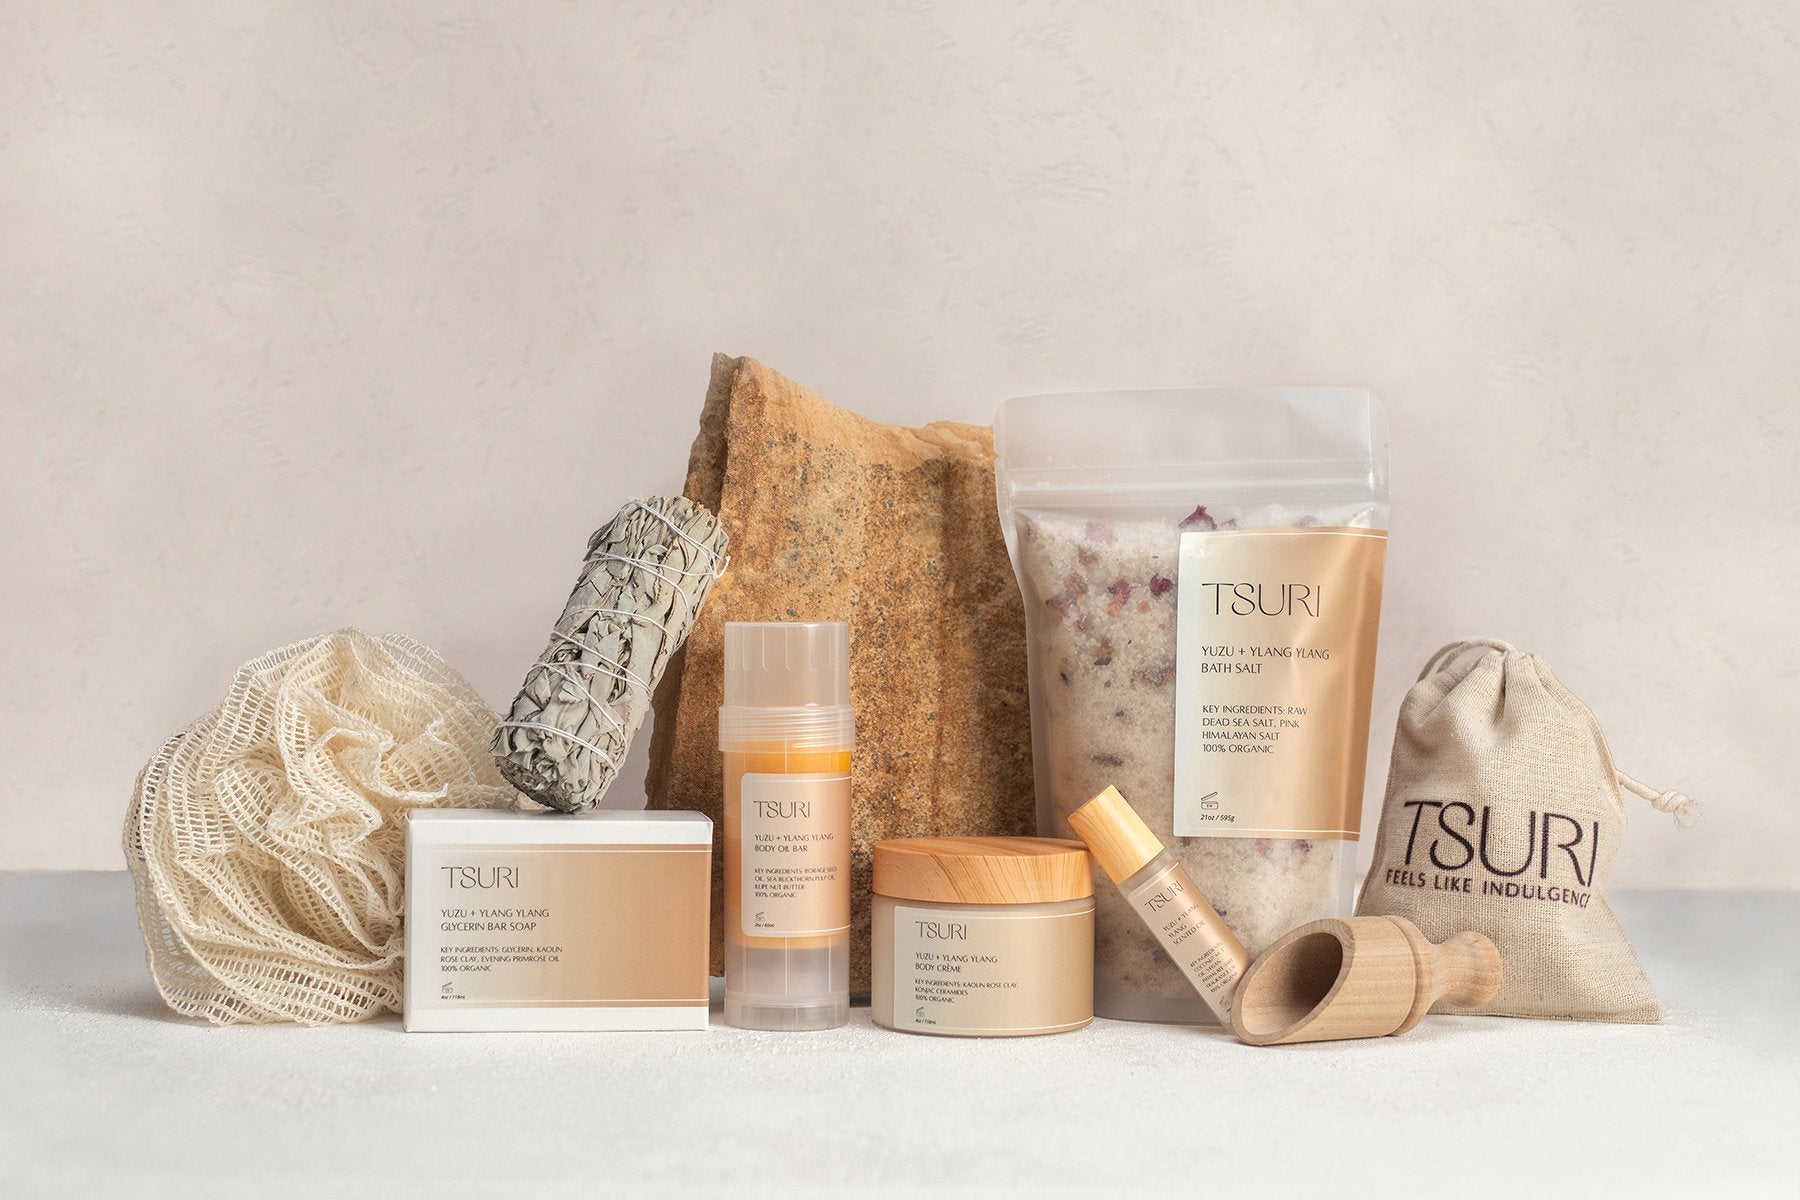 Self-Care Sunday for 2 Kit — Rooted Apothecary